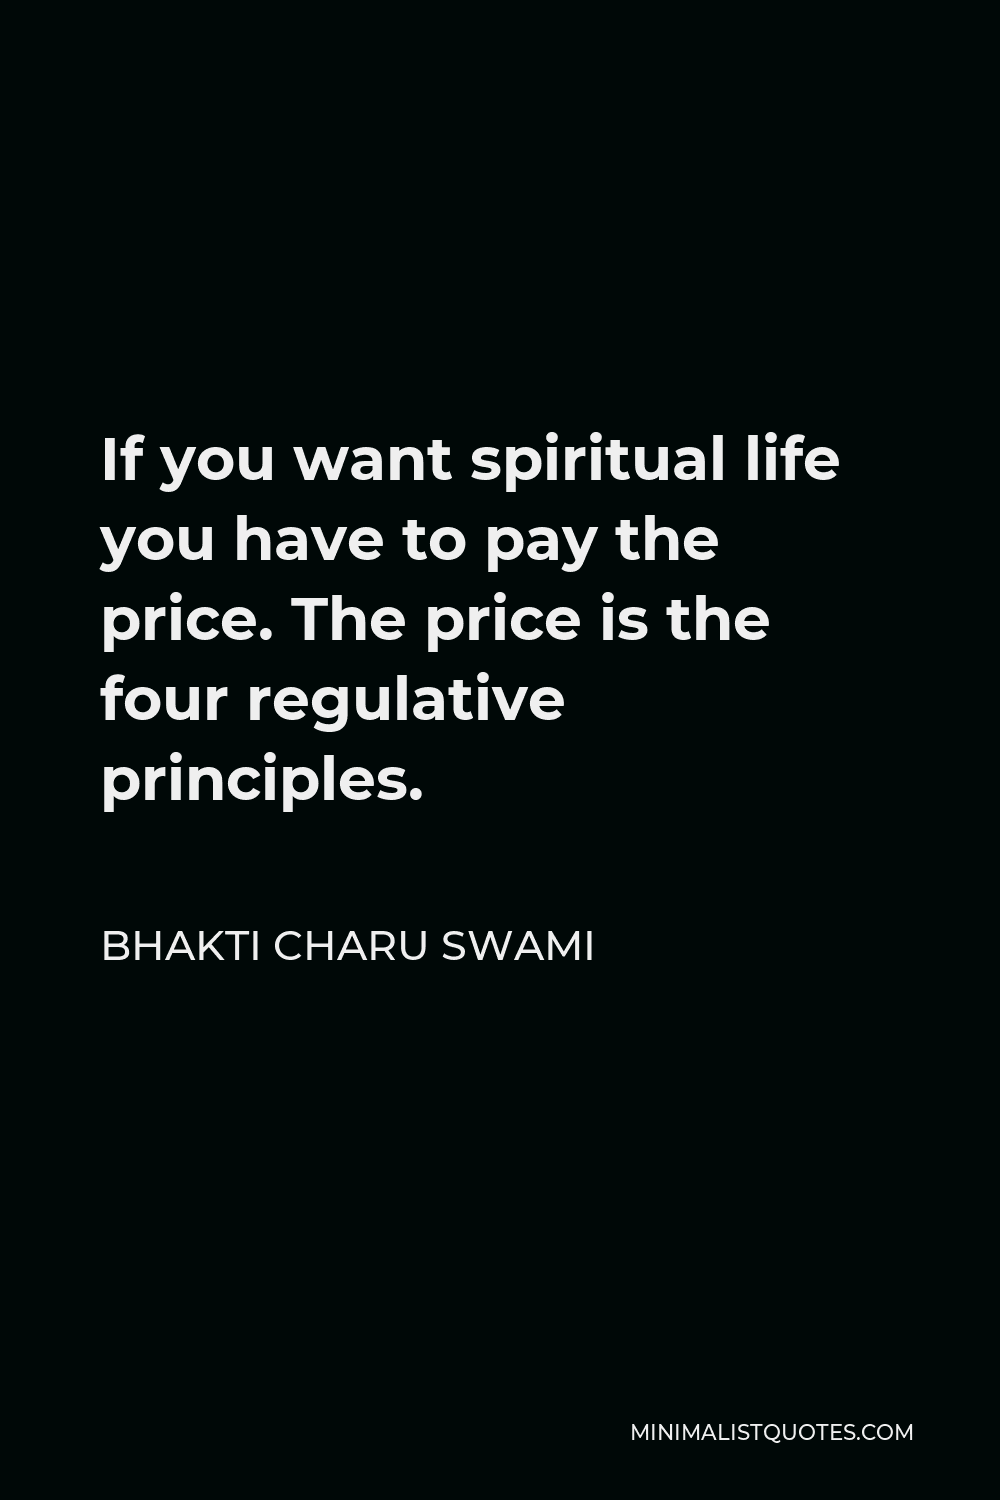 Bhakti Charu Swami Quote - If you want spiritual life you have to pay the price. The price is the four regulative principles.